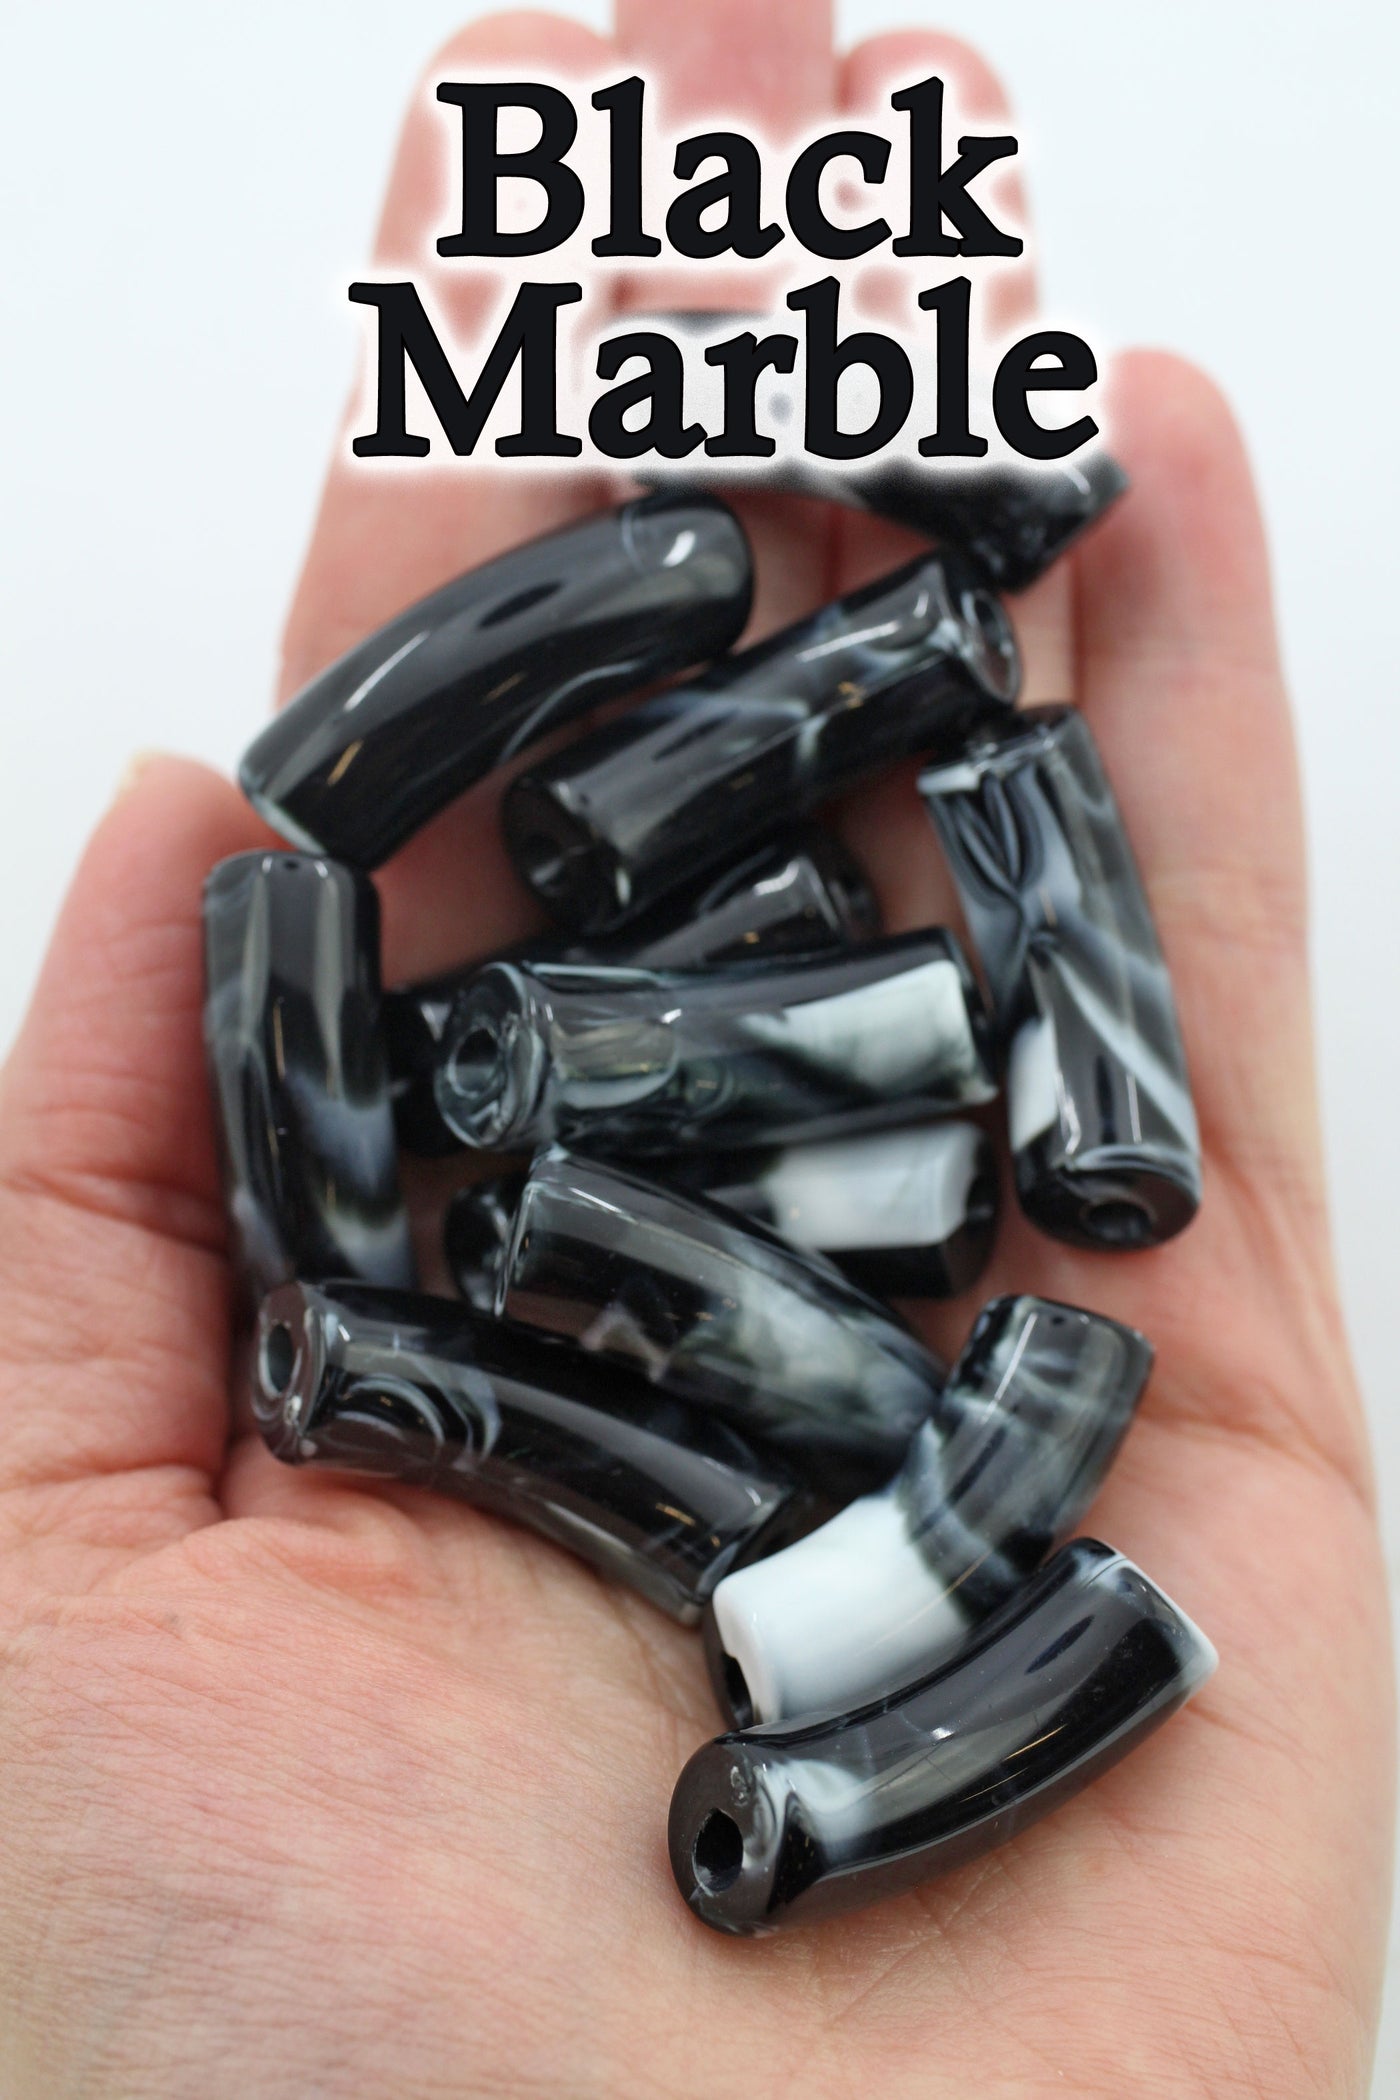 Black Marble Acrylic Bamboo Beads, Curved Tube Beads, 12mm Colorful Bangle Beads